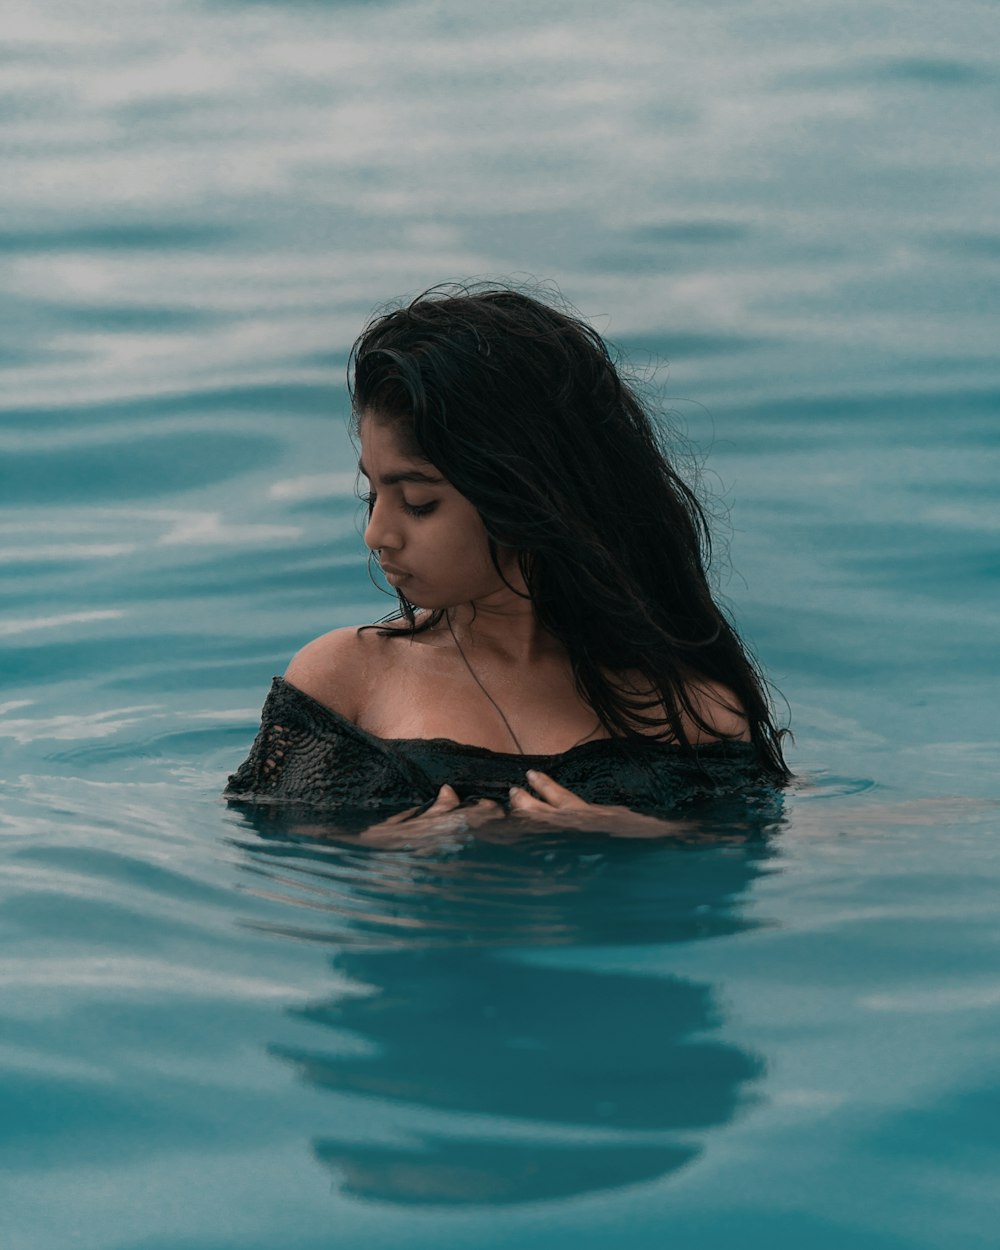 woman wearing black boat-neck top in body of water close-up photography